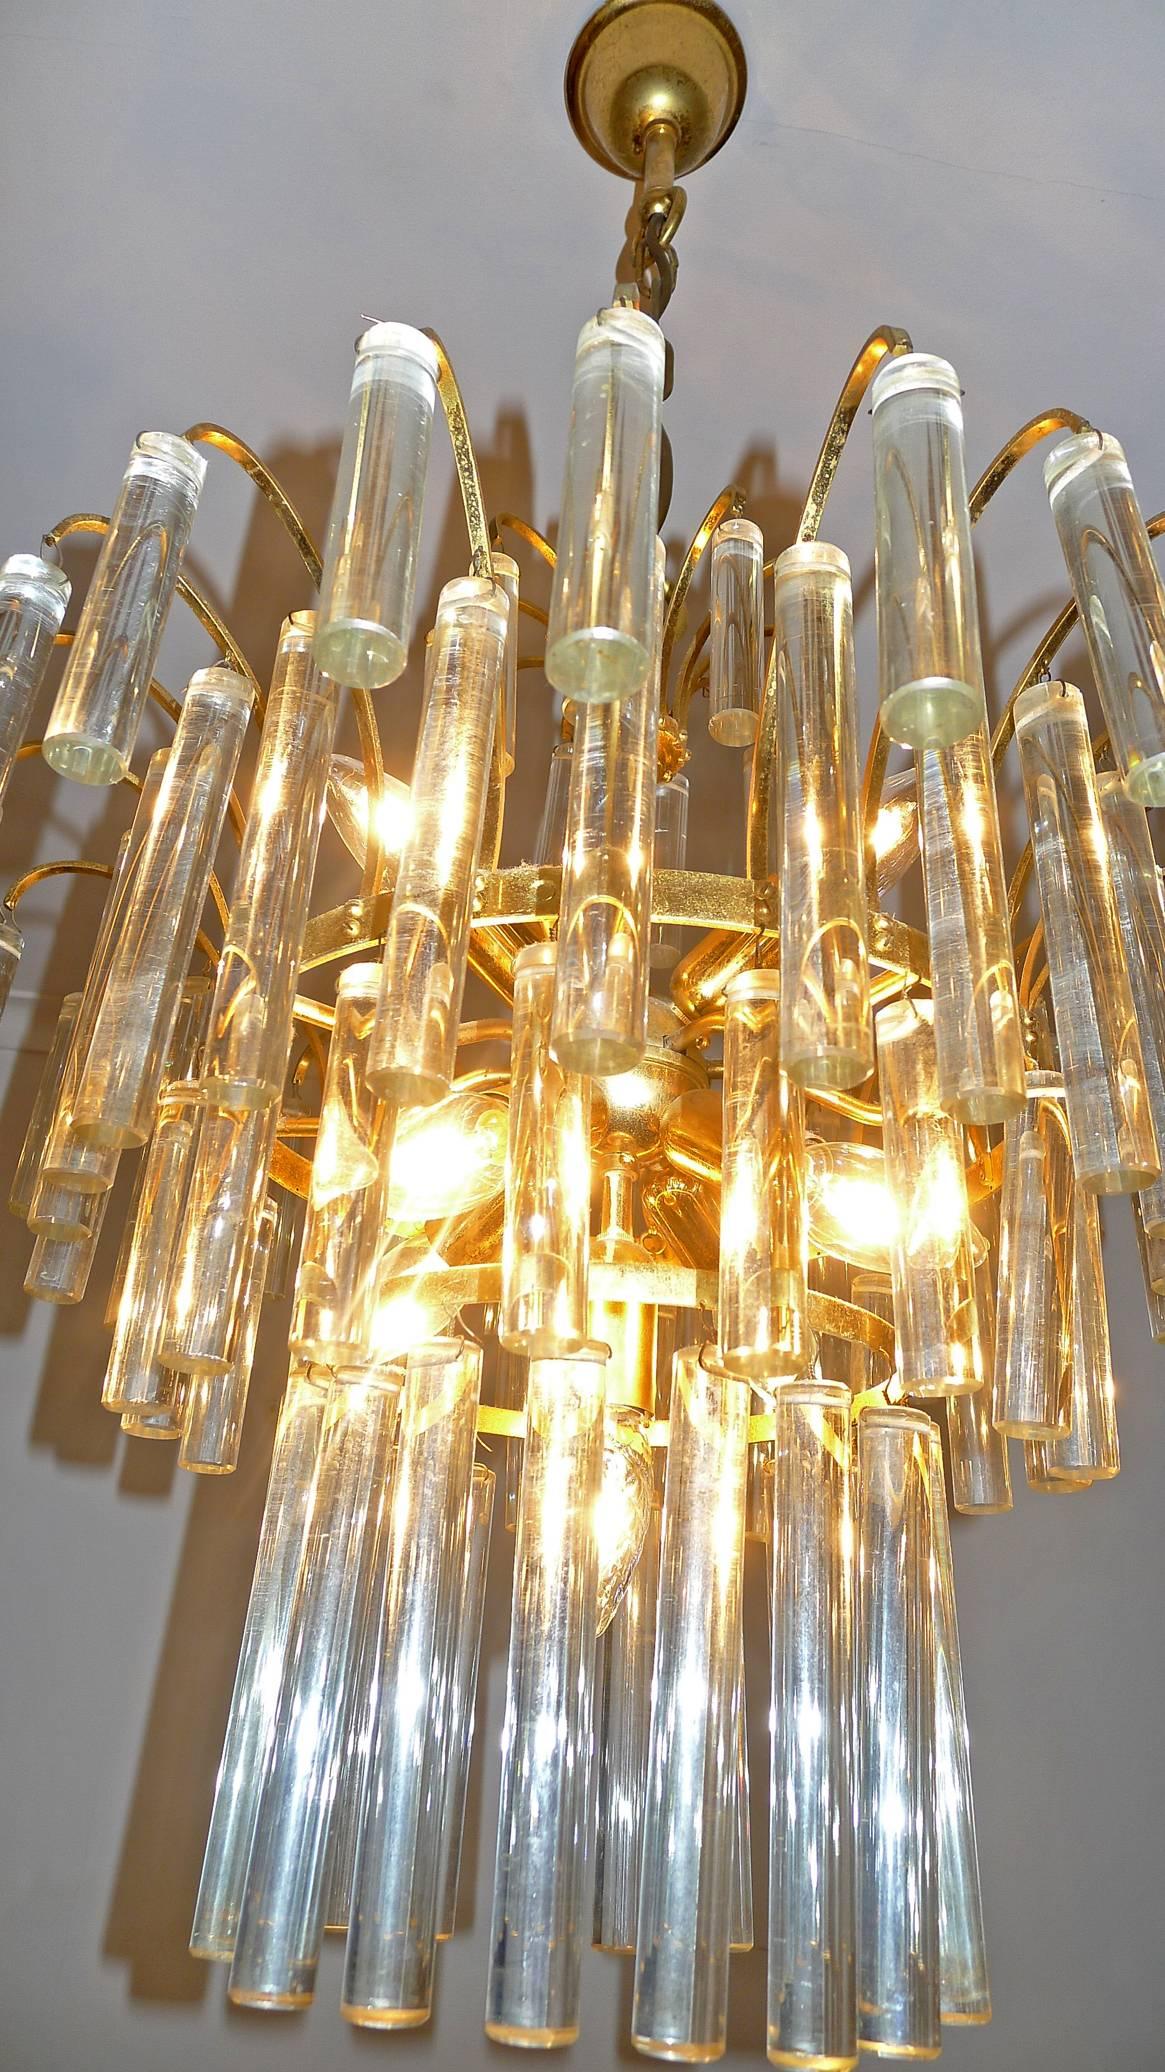 20th Century Large Venini Camer Midcentury Gilt Brass 94 Crystal Rods Waterfall Chandelier For Sale